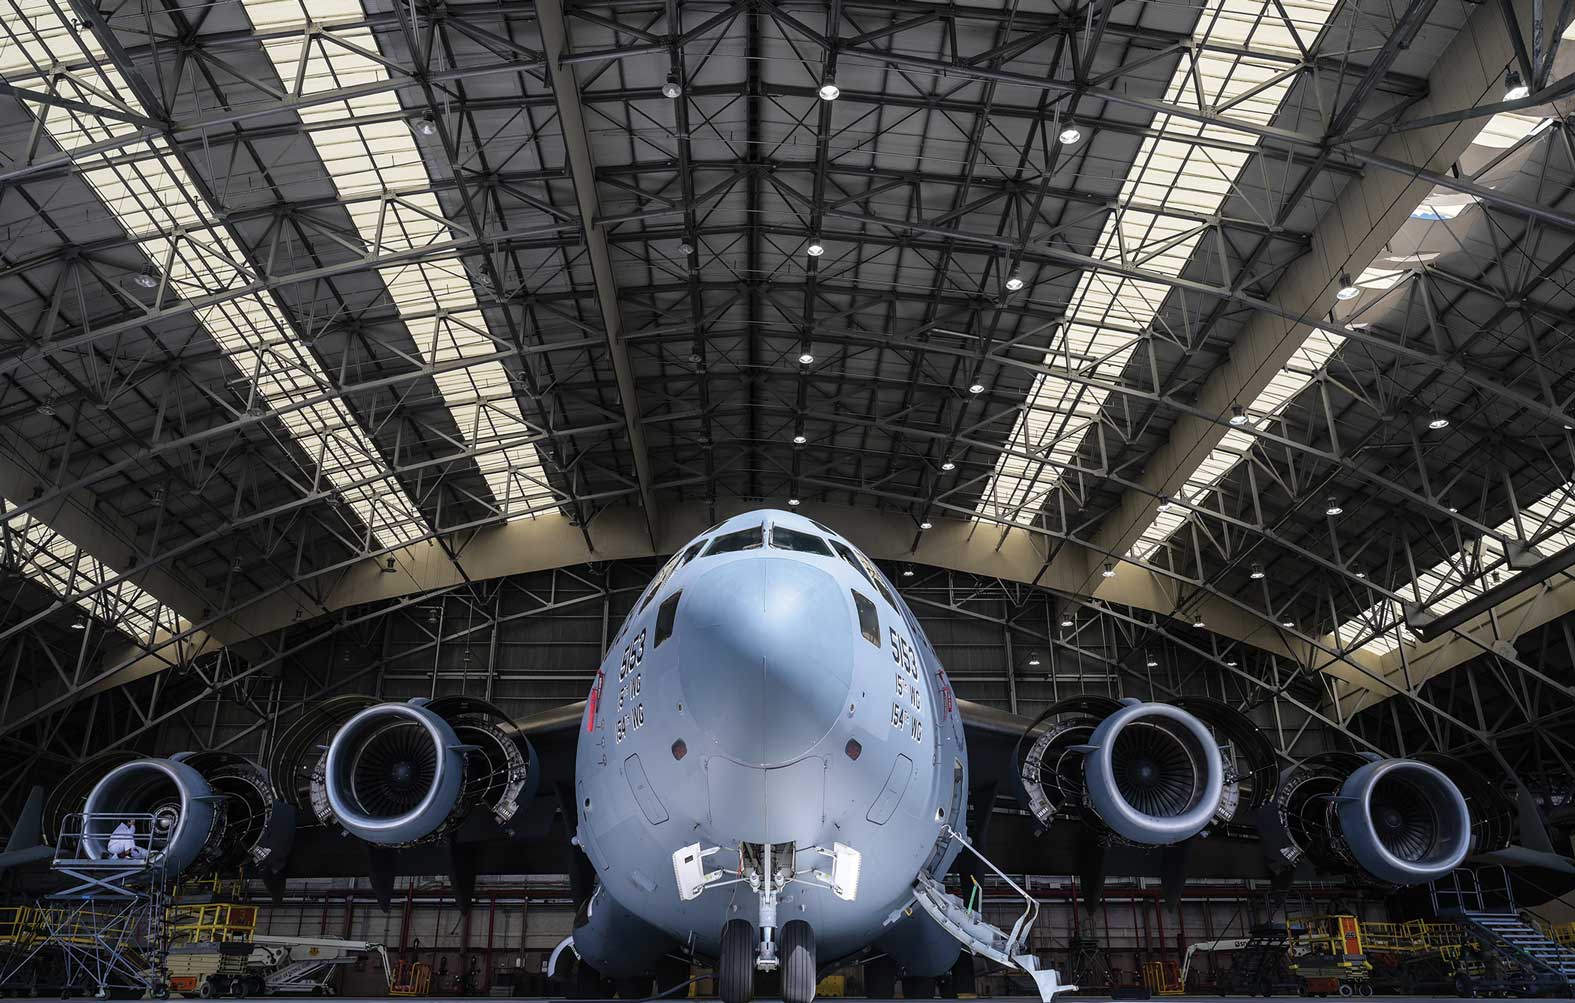 A large airplane inside of an airport hangar.